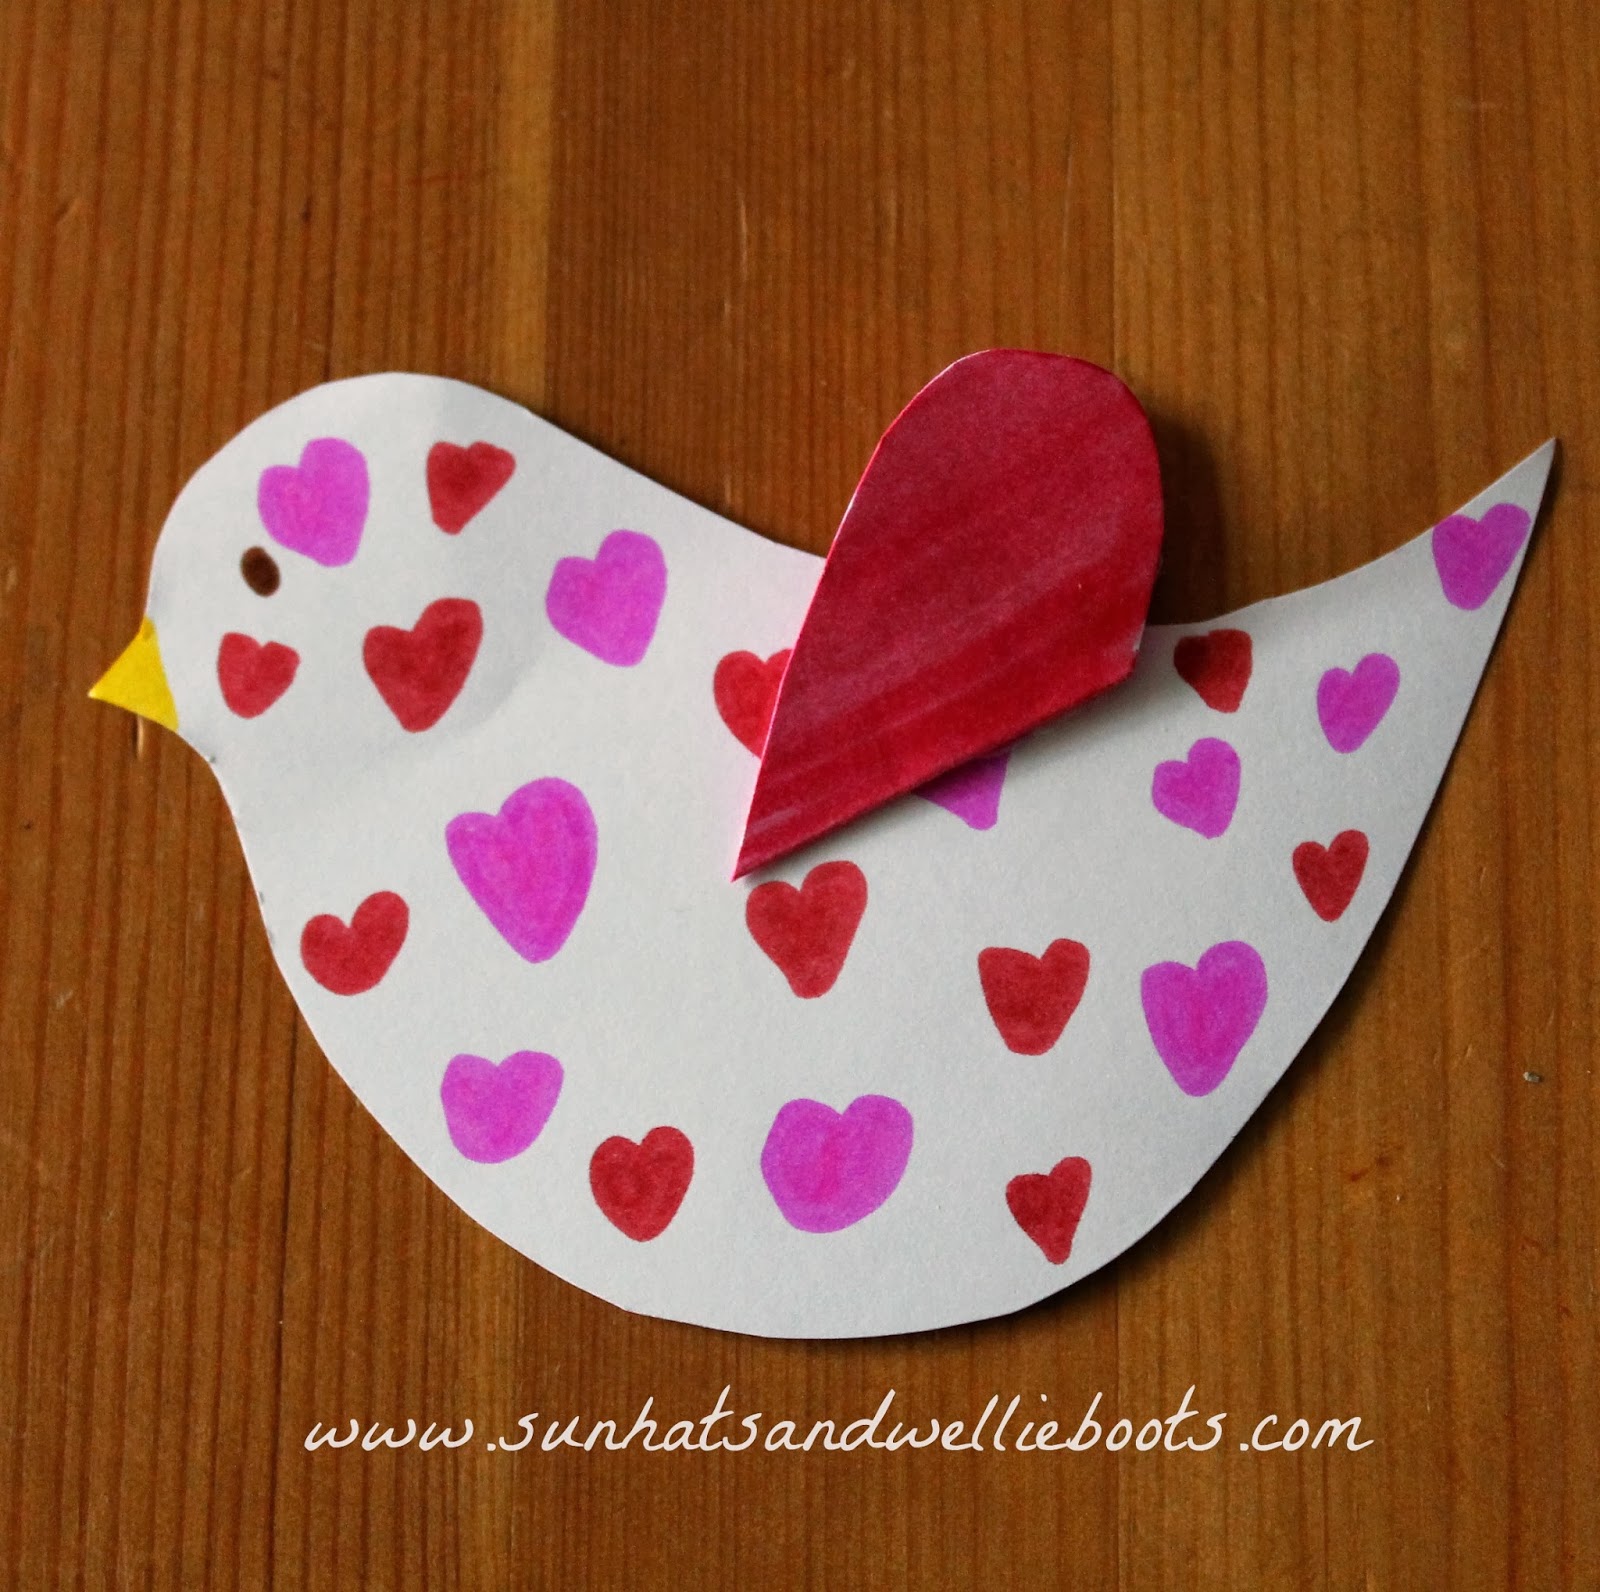 Sun Hats & Wellie Boots: Tissue Paper Heart Collage Card for